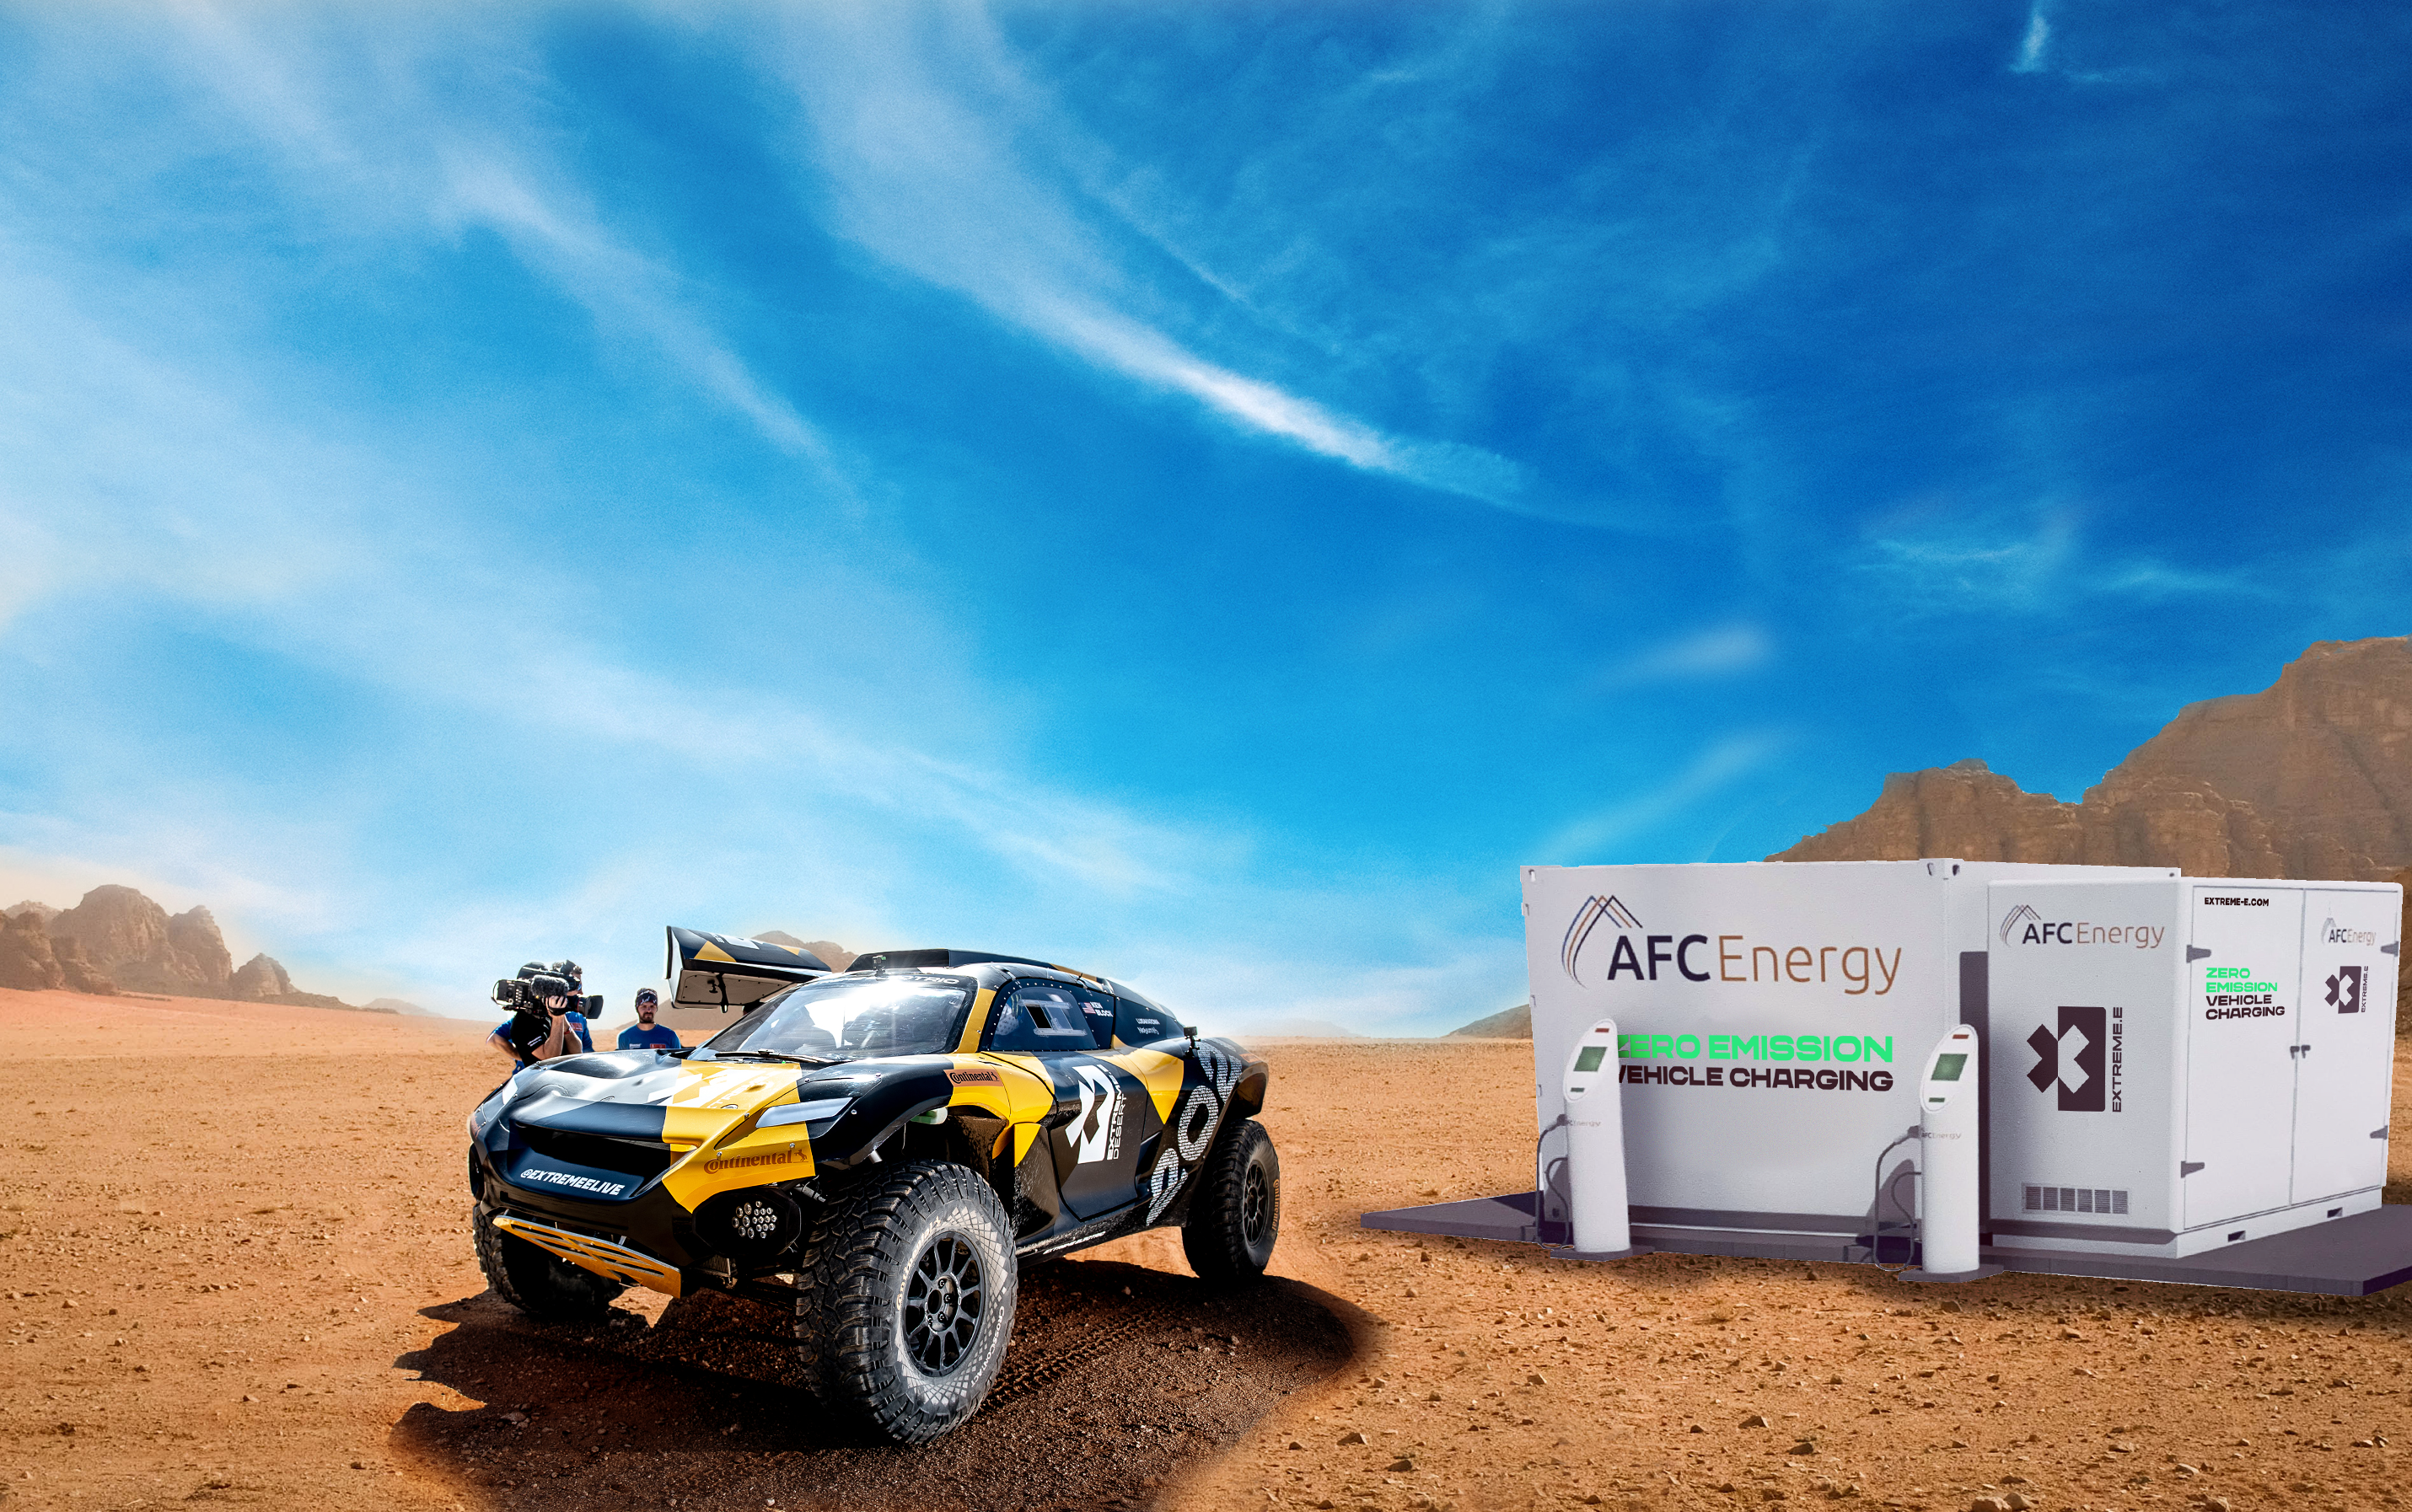 Geek insider, geekinsider, geekinsider. Com,, extreme e and afc energy to pioneer zero emission vehicle charging, news